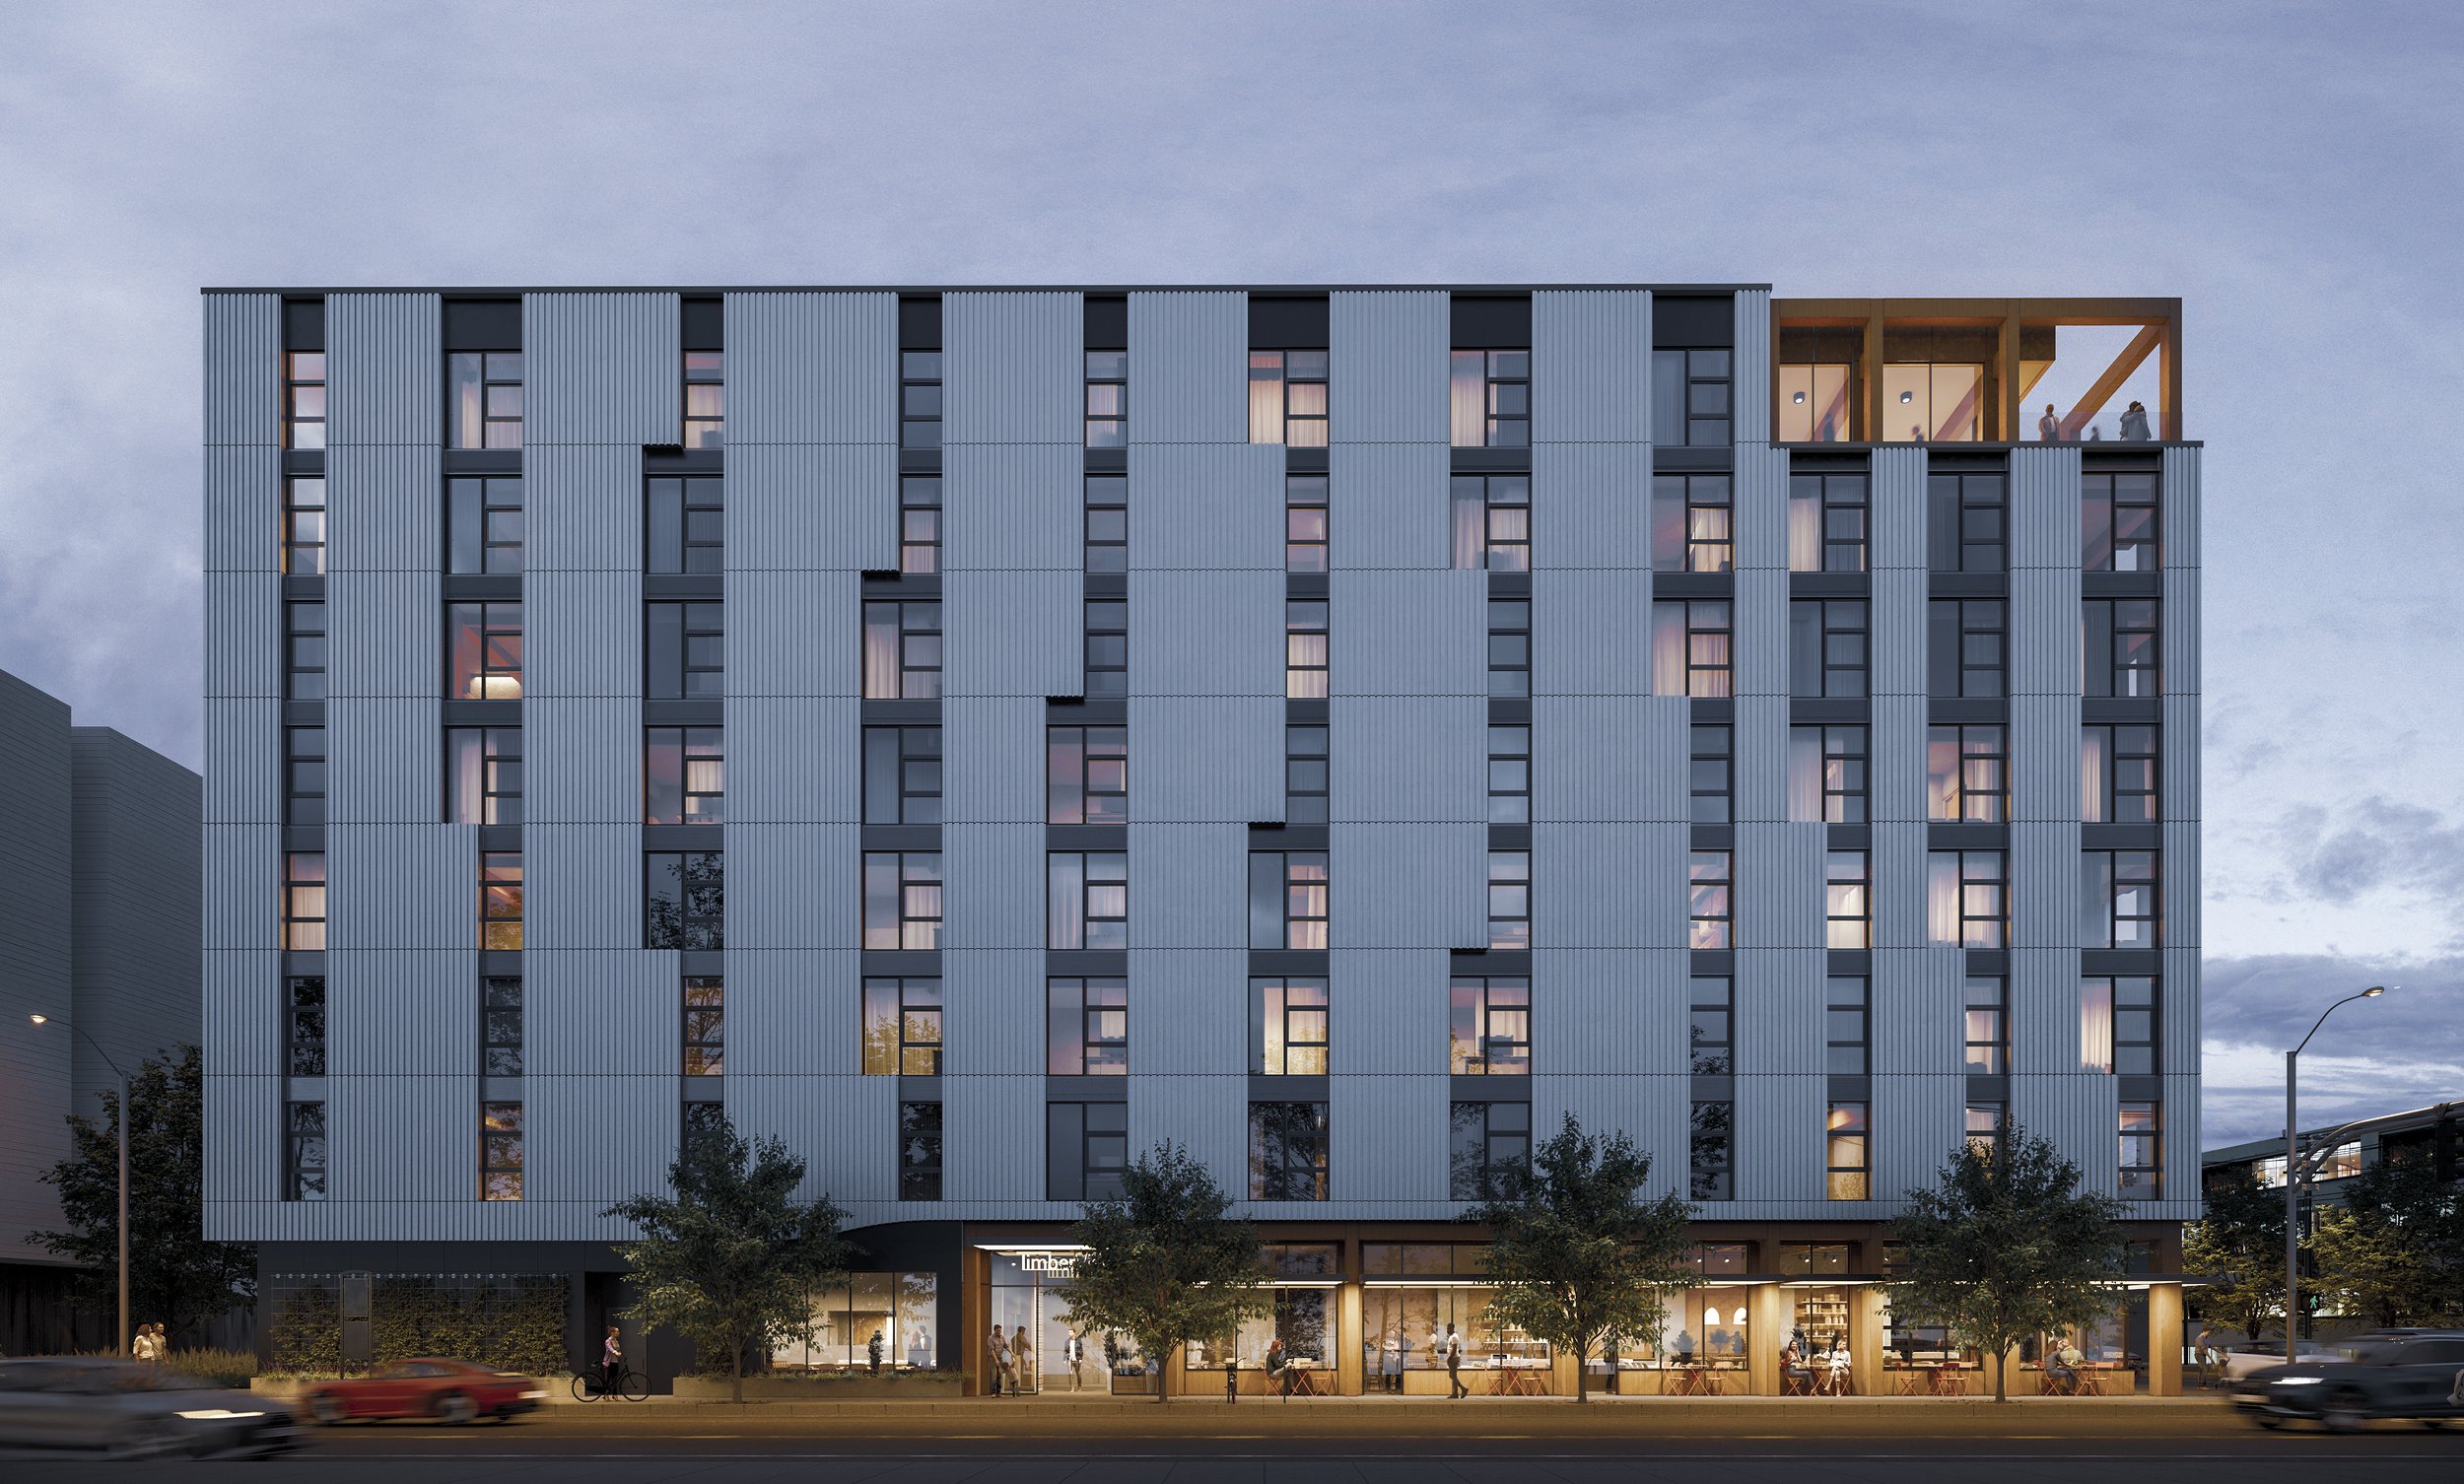 Portland's Timberview VIII mass timber multifamily development will offer more than 100 affordable units. Rendering: Access Architecture